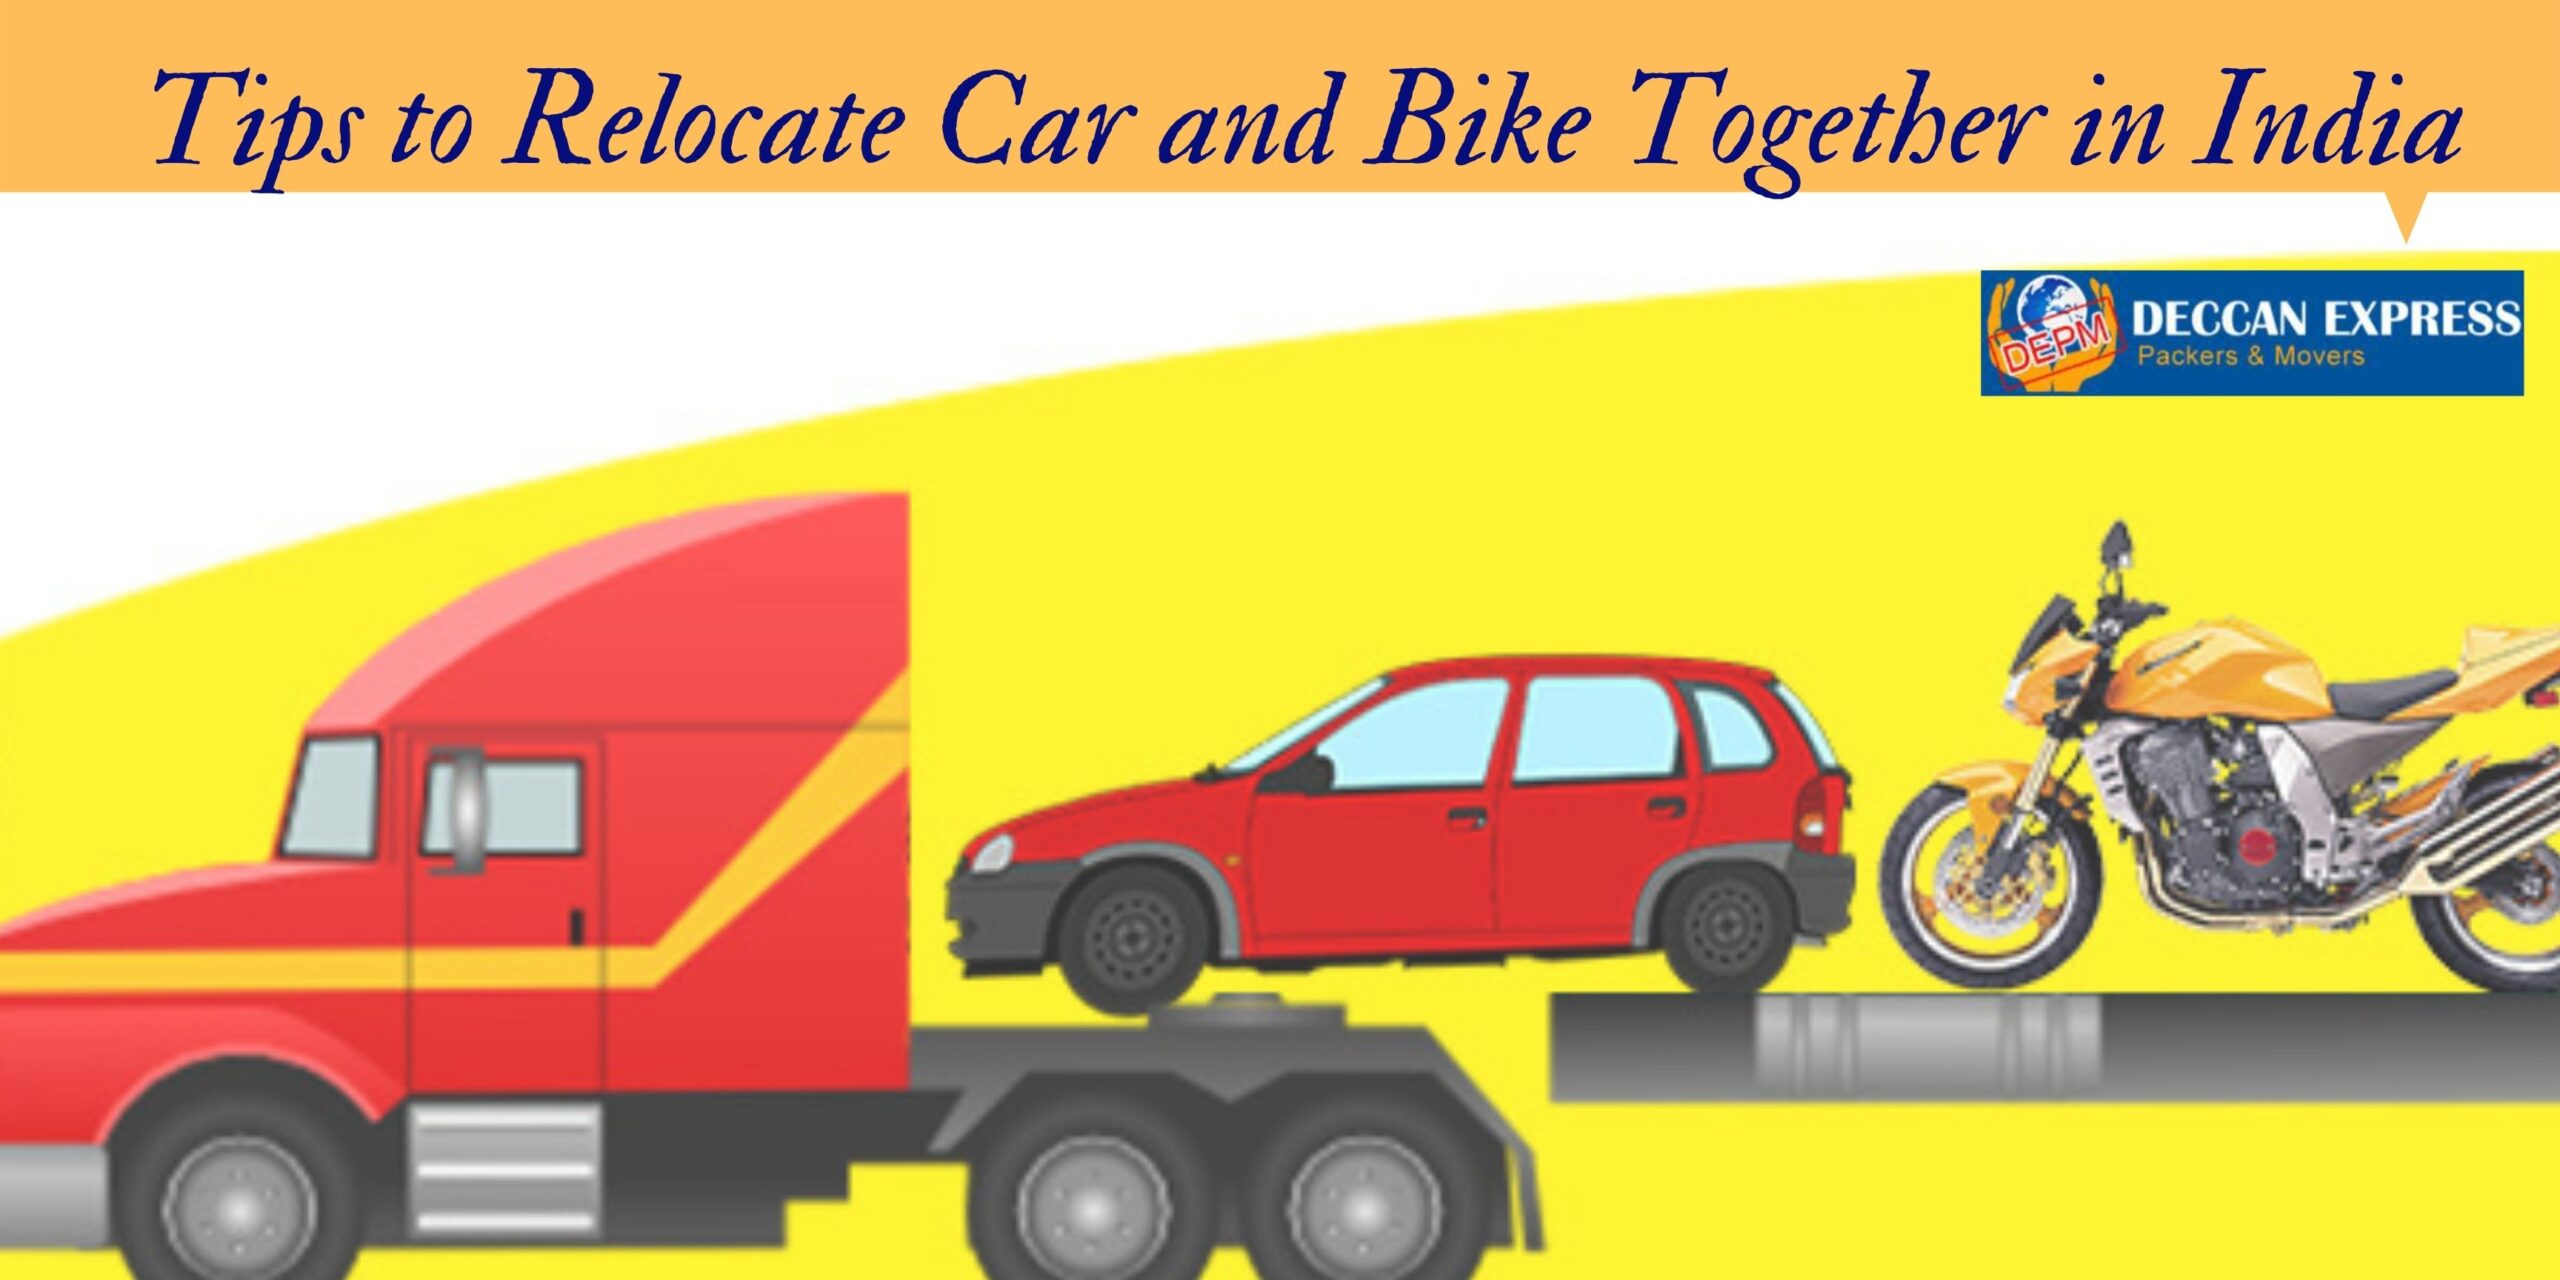 Tips to Relocate Car and Bike Together in India